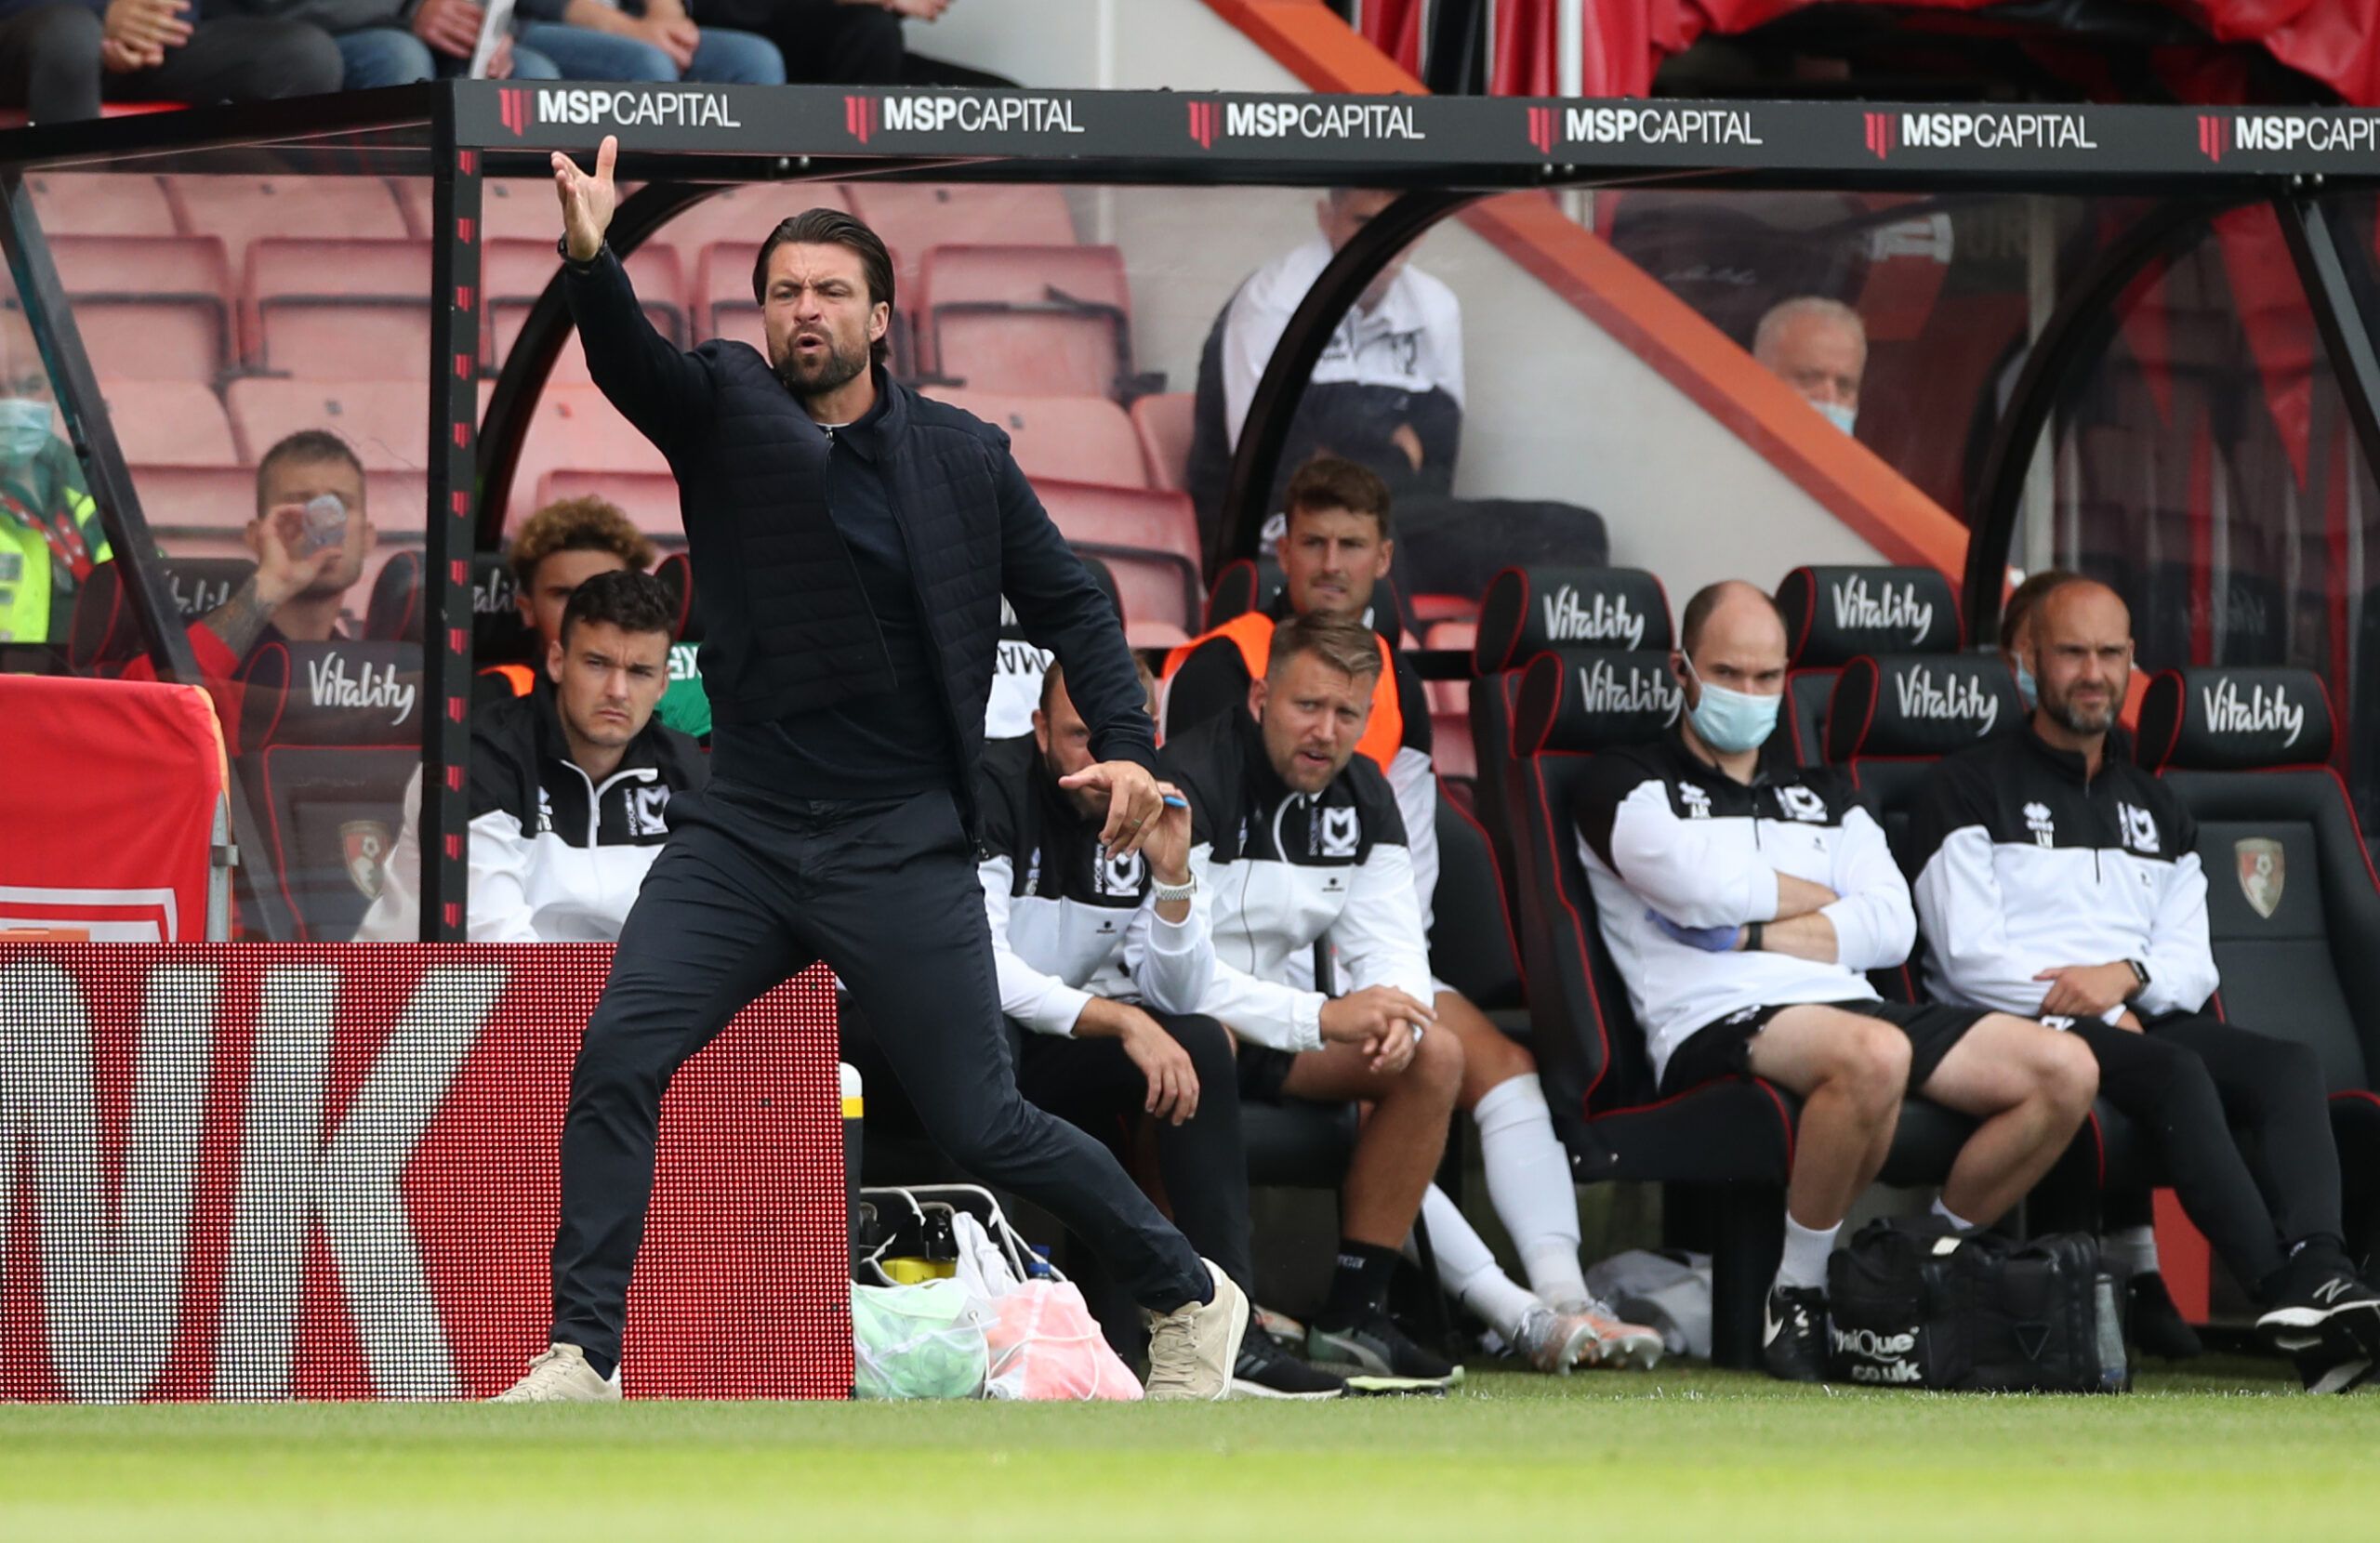 Soccer Football - Carabao Cup First Round - AFC Bournemouth v Milton Keynes Dons - Vitality Stadium, Bournemouth, Britain - July 31, 2021  Milton Keynes Dons manager Russell Martin reacts Action Images/Peter Cziborra